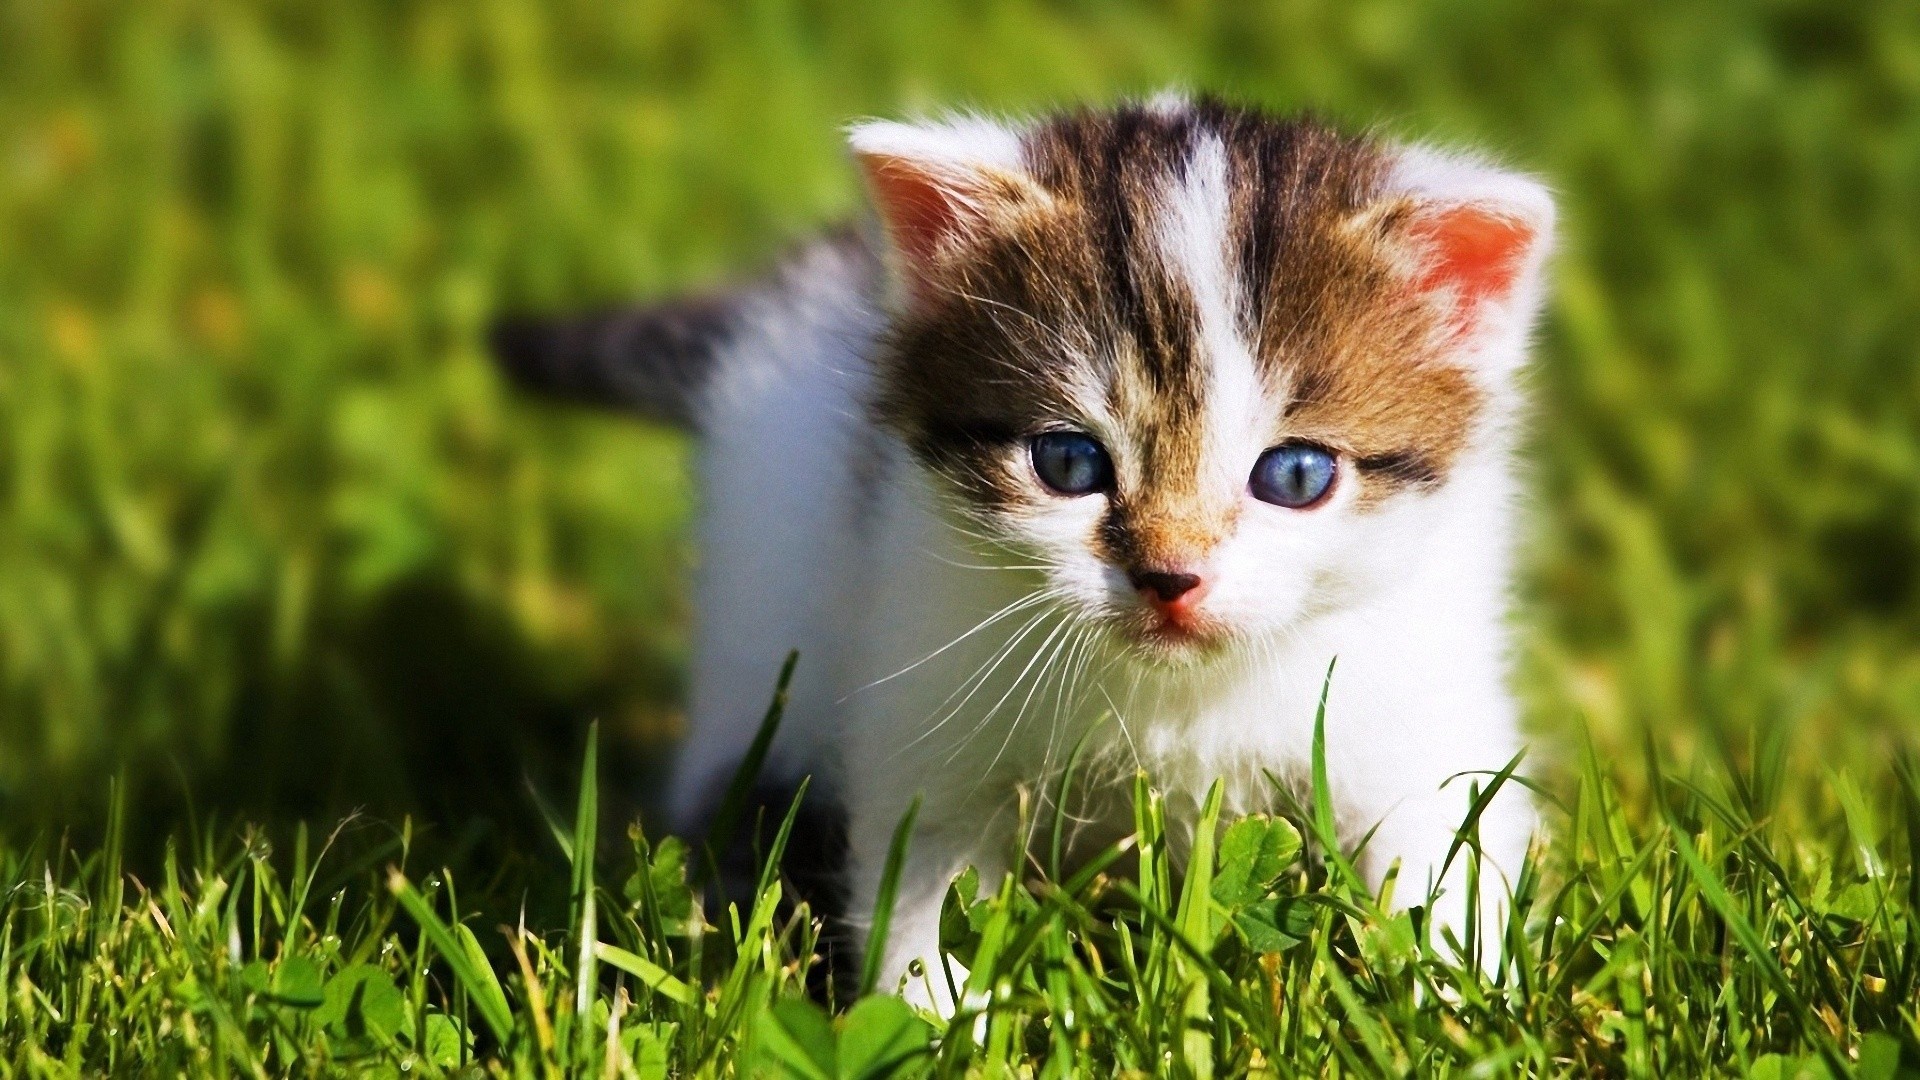 Cute Baby Animals Wallpapers 1920x1080 1920x1080